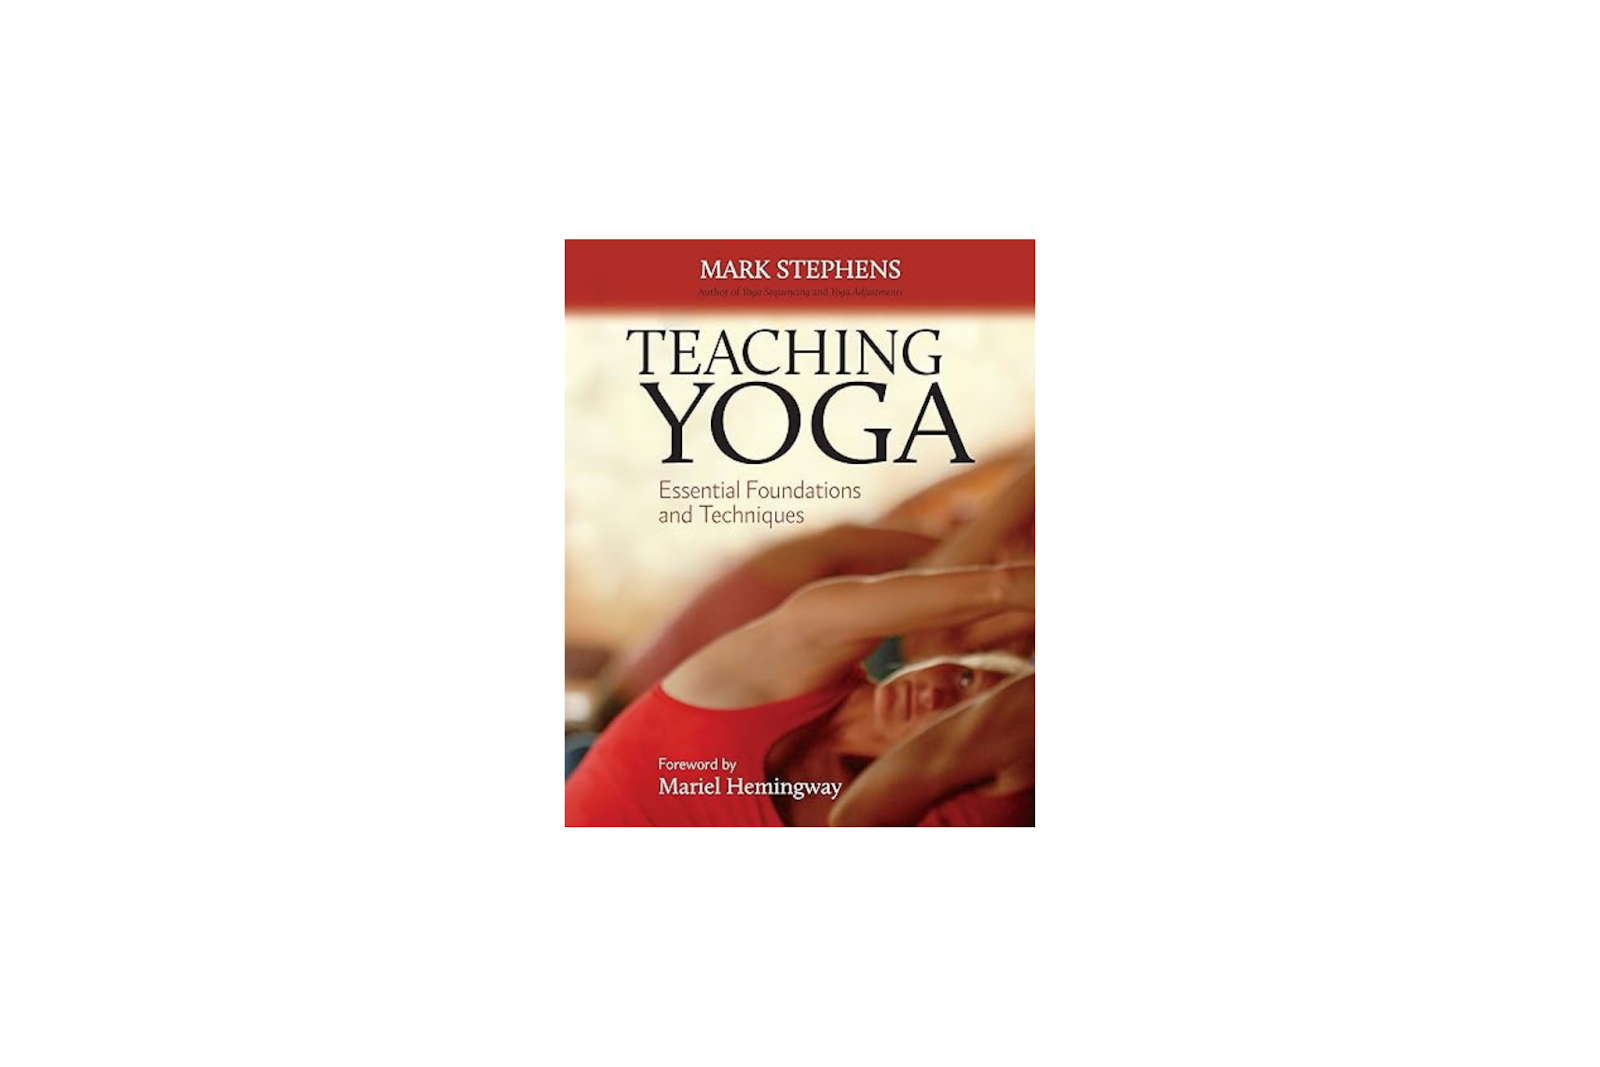 Teaching Yoga: Essential Techniques and Foundations by Mark Stephens